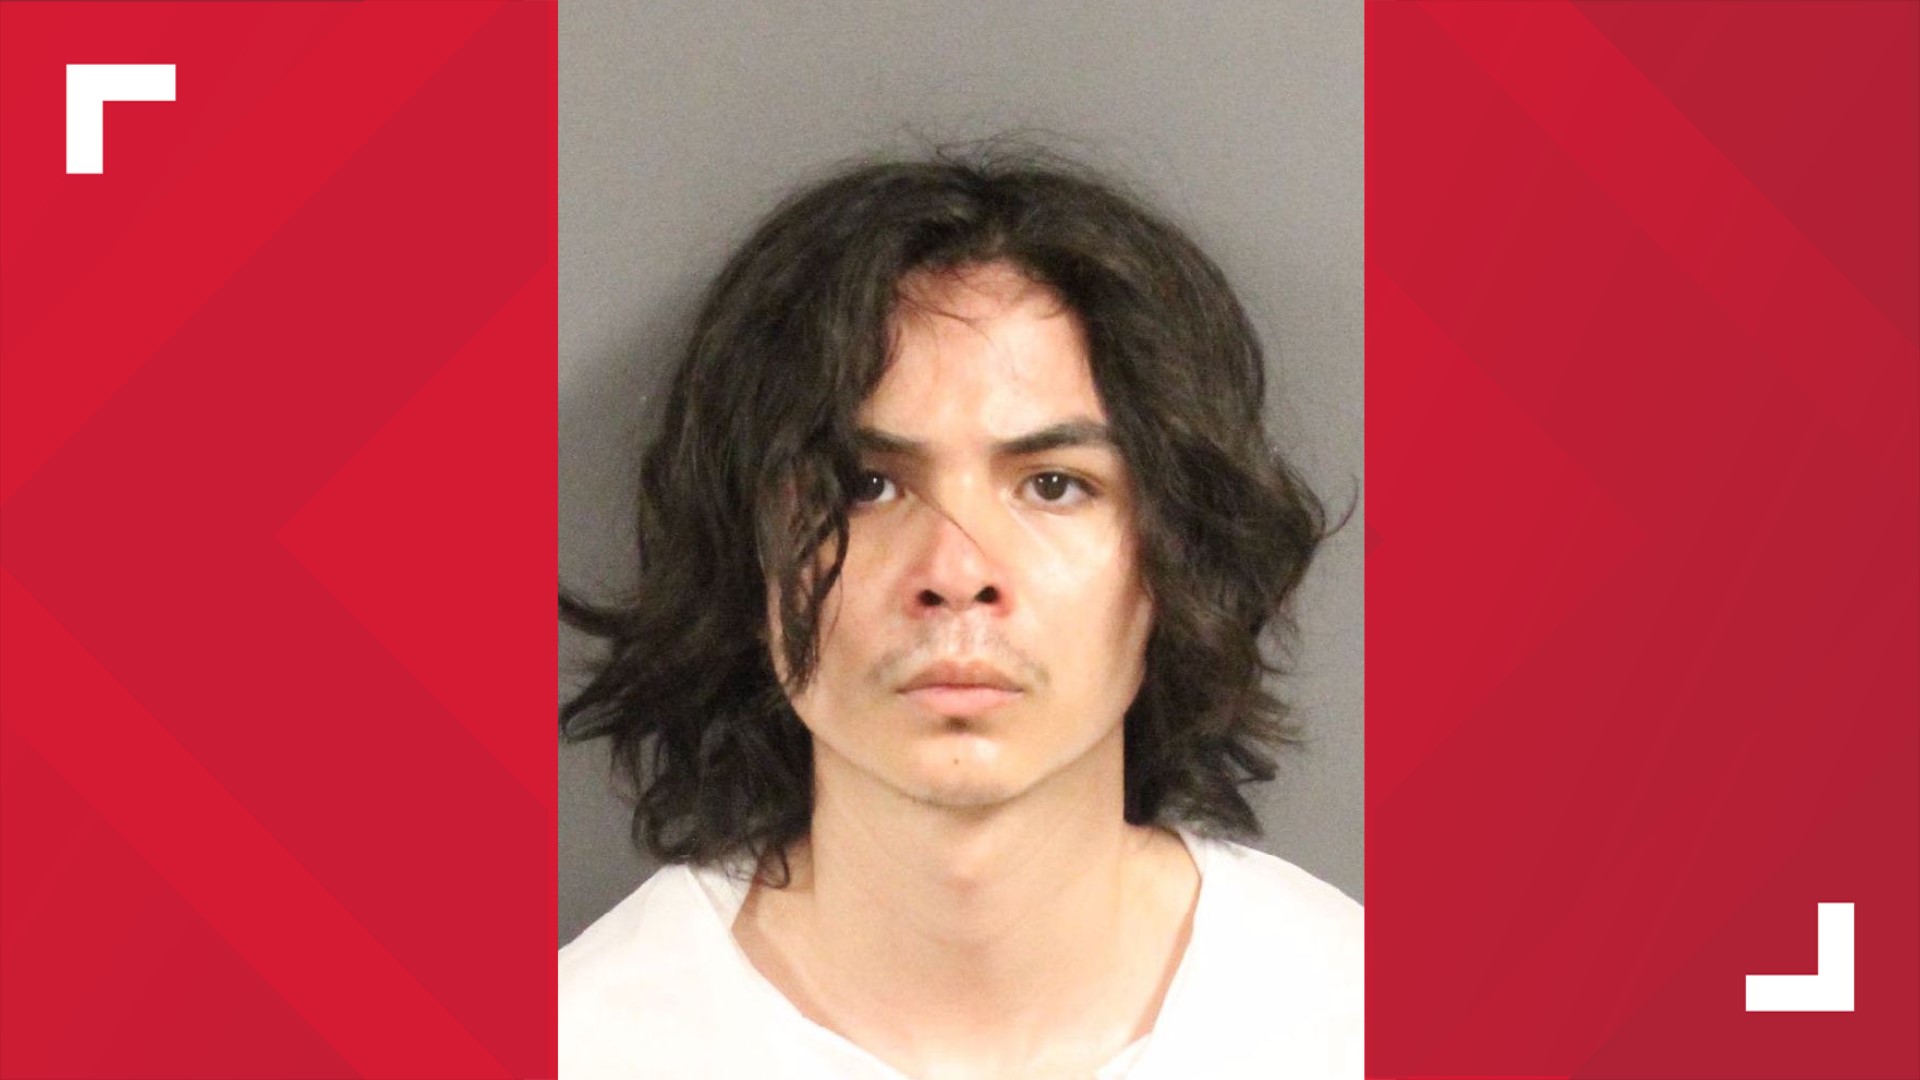 The Davis Police Department arrested Carlos Dominguez as a suspect in the string of stabbings.